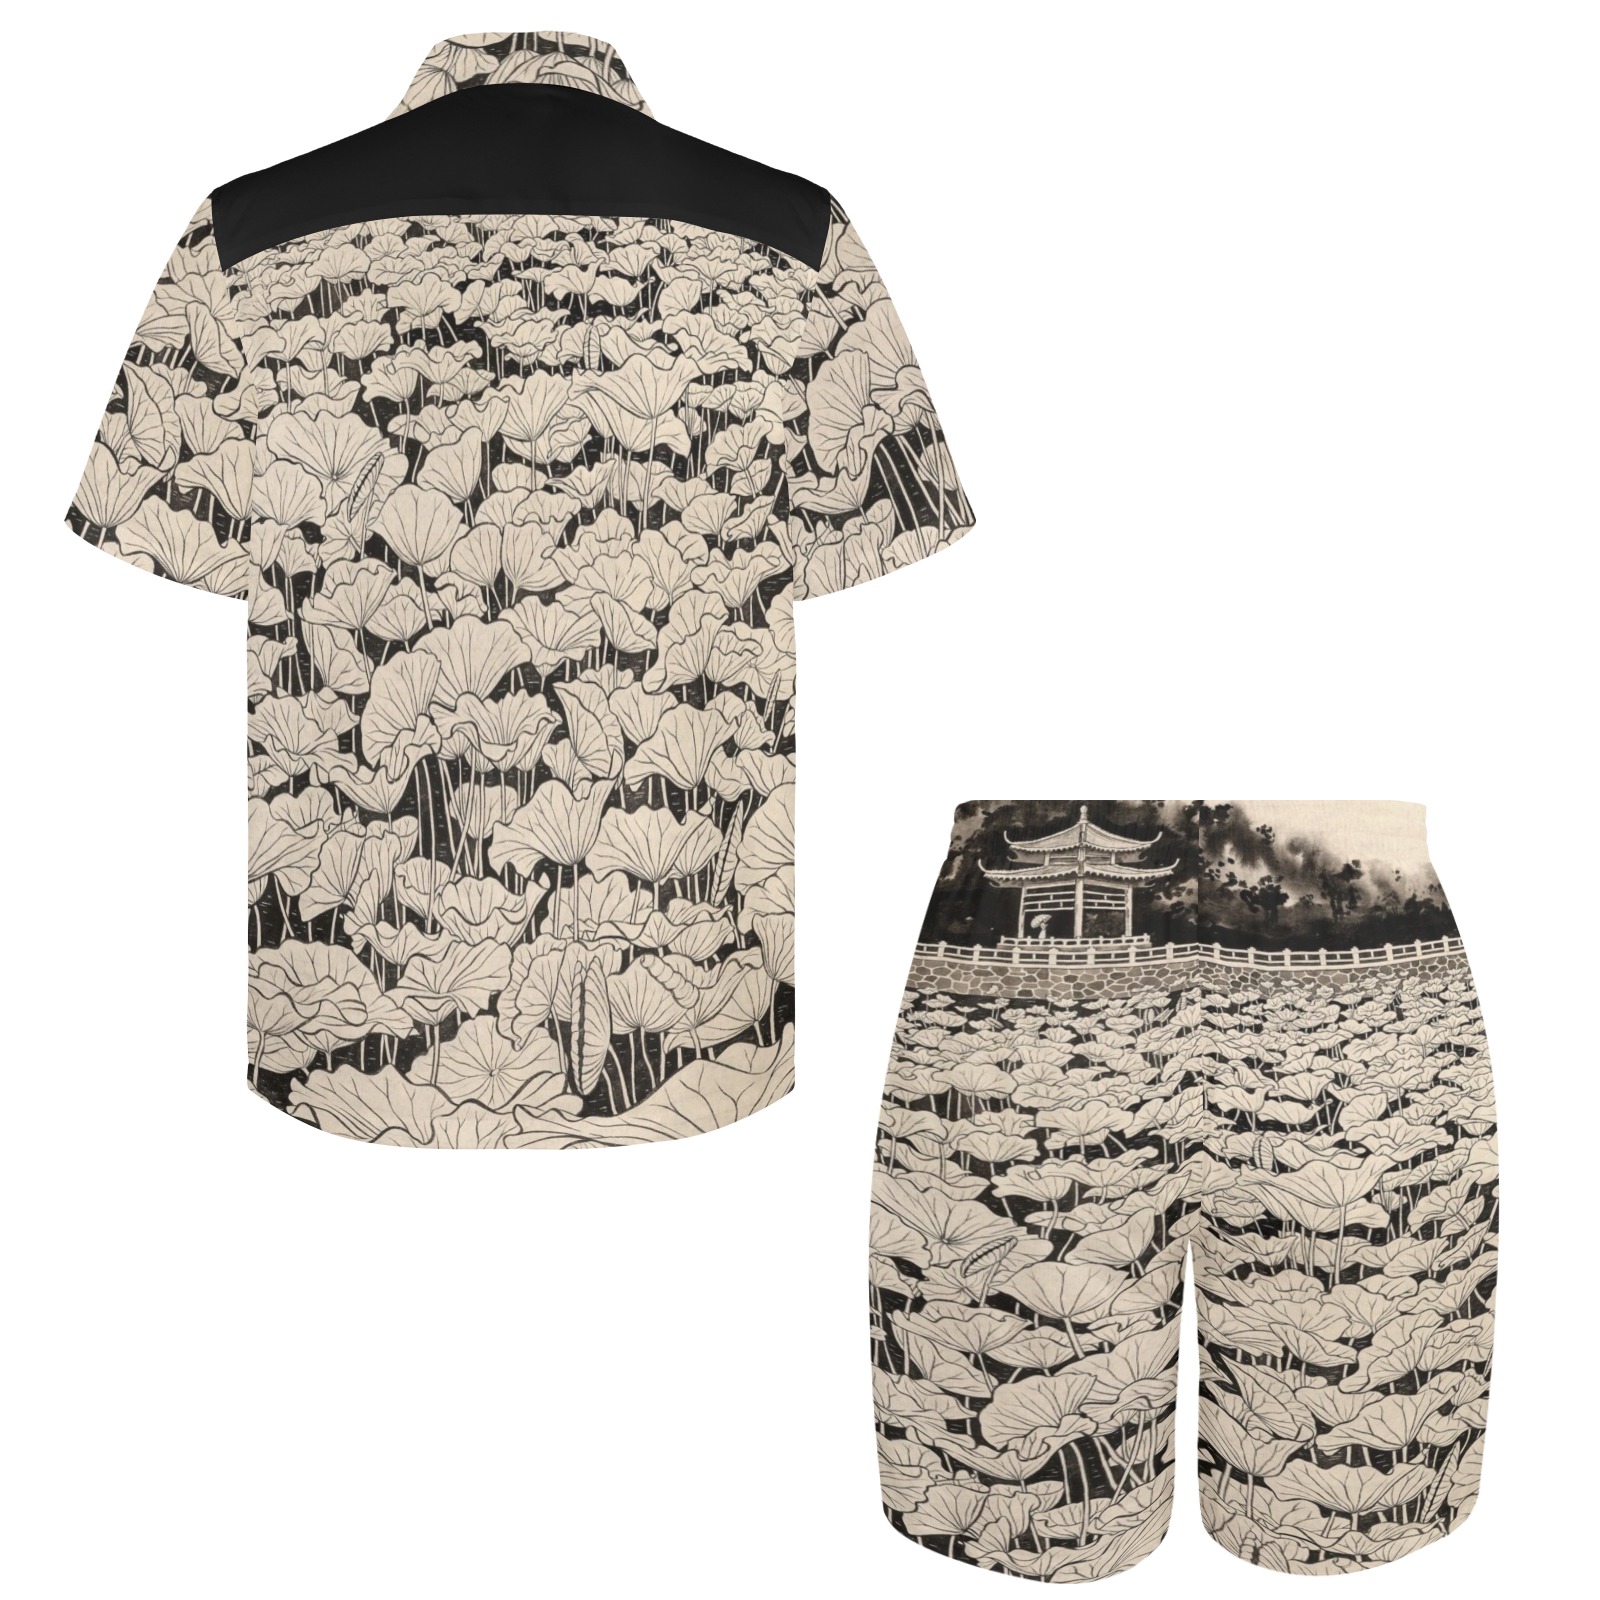 LILY POND, signed print from the Shanghai series (1) Men's Shirt and Shorts Outfit (Set26)